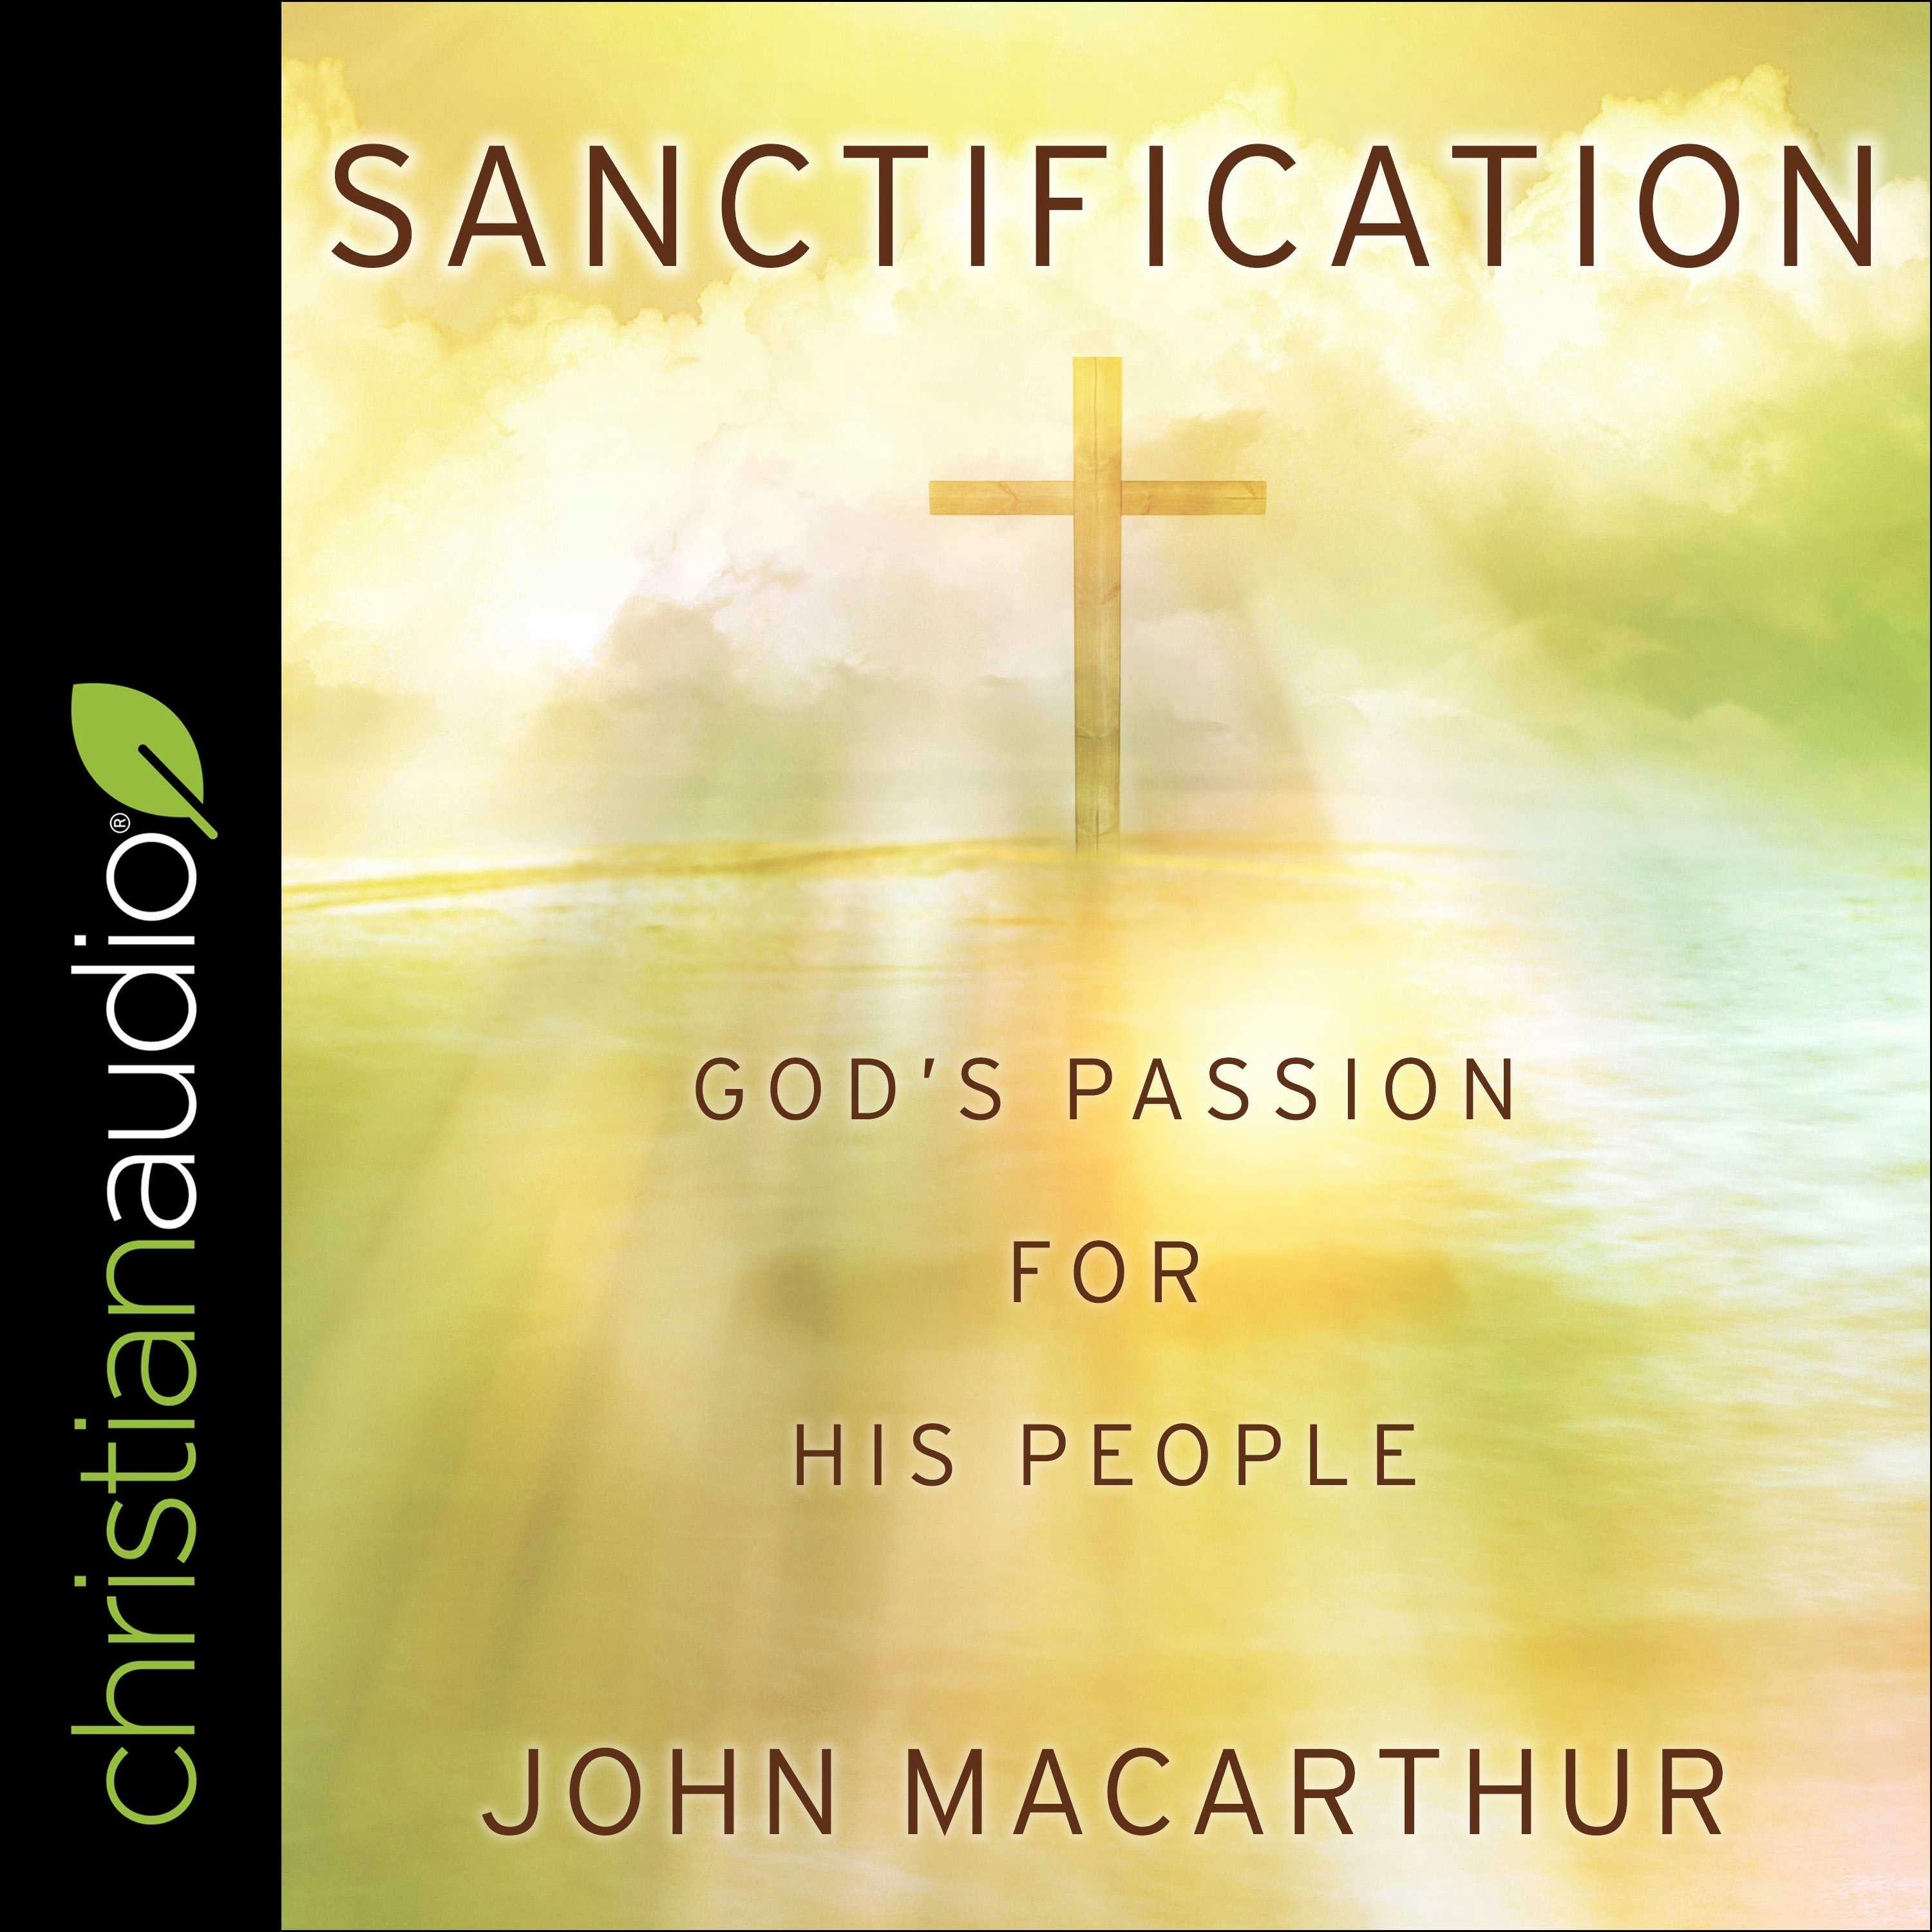 Sanctification: God’s Passion for His People - John MacArthur